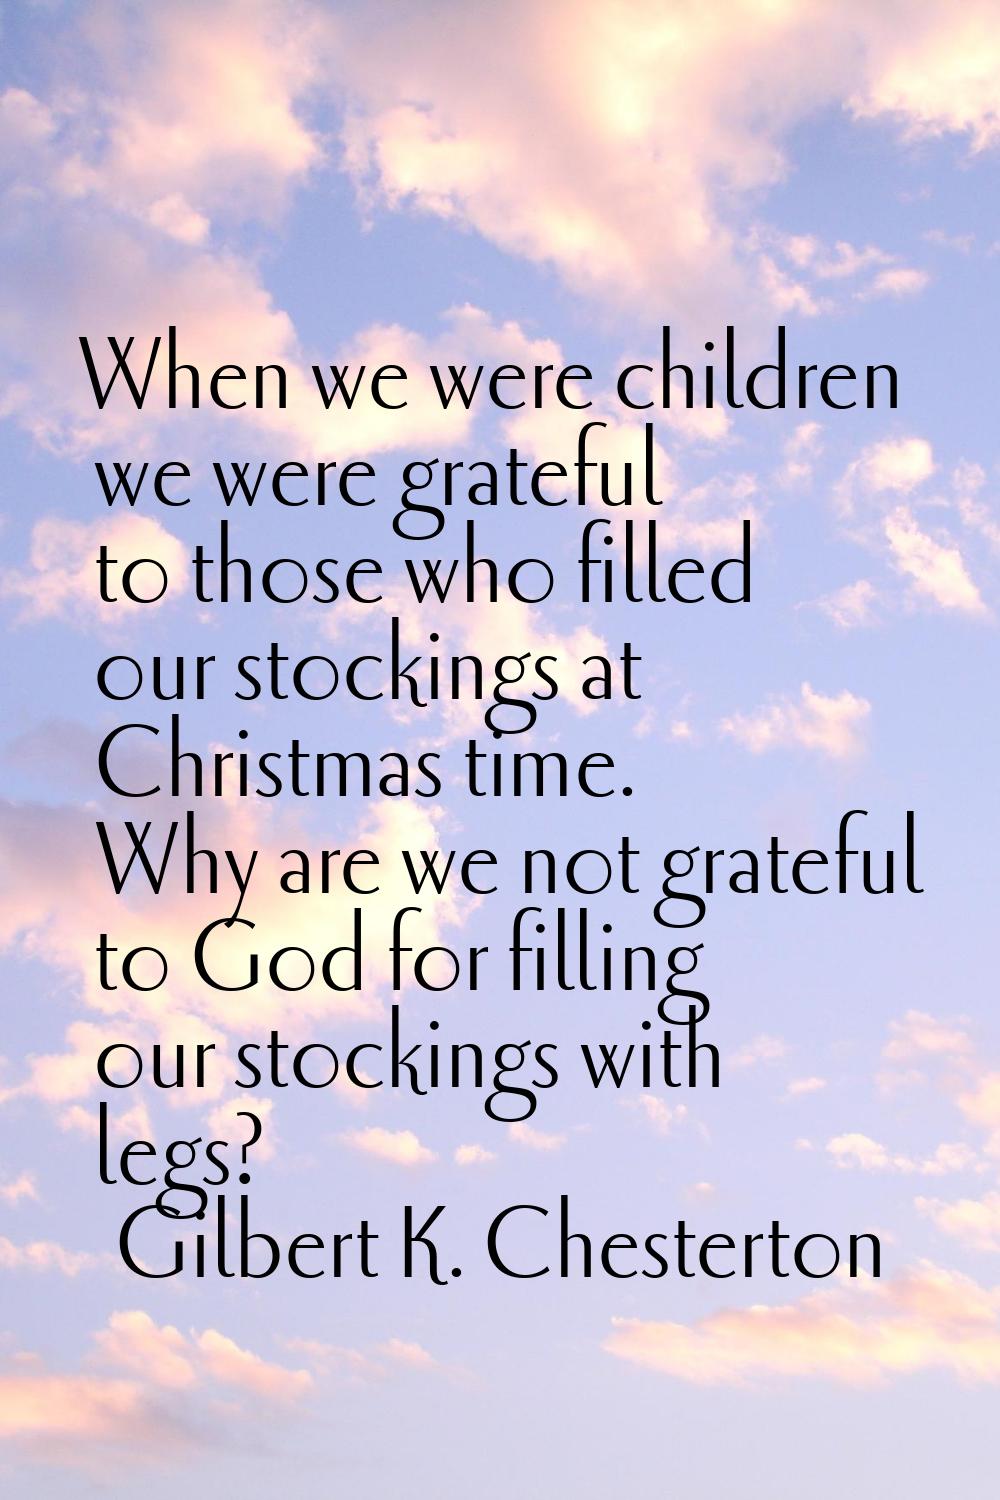 When we were children we were grateful to those who filled our stockings at Christmas time. Why are